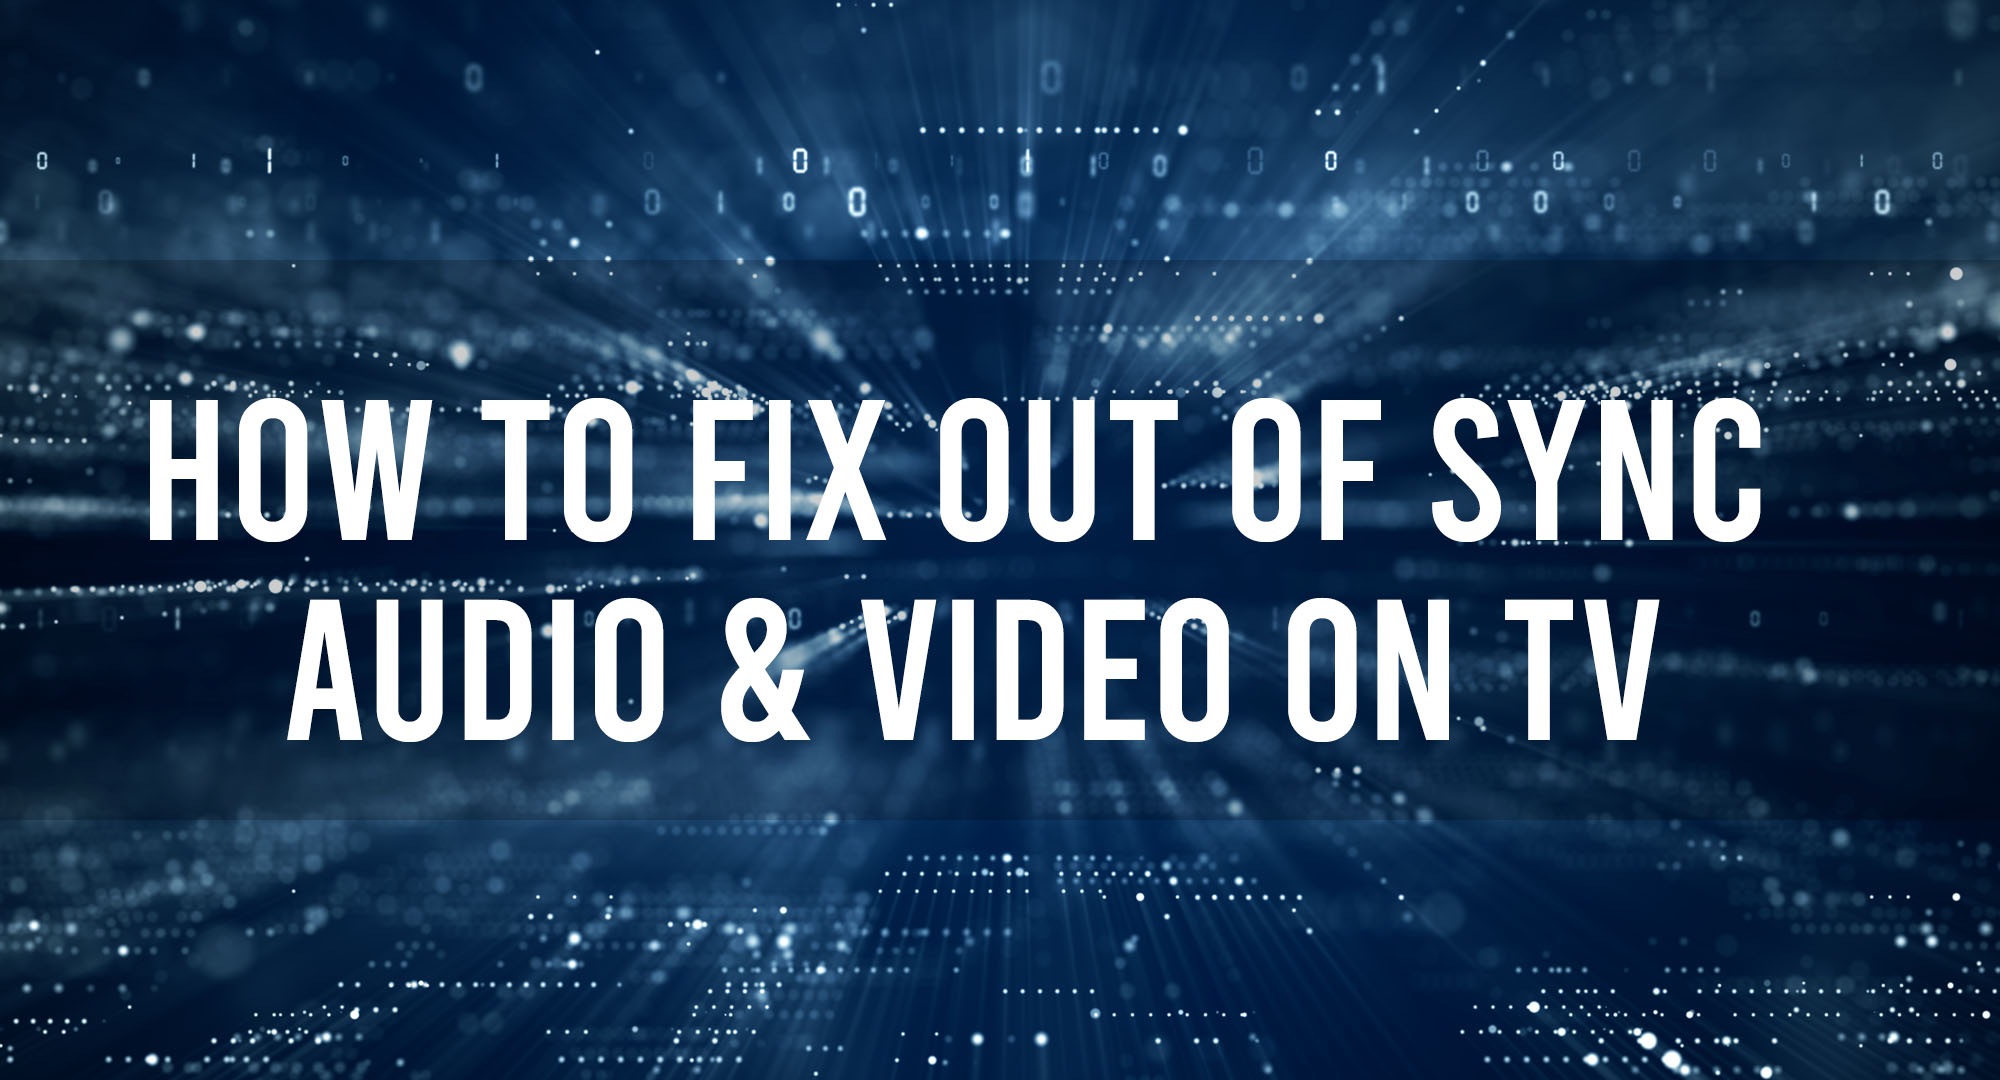 How to fix out of sync audio and video on tv